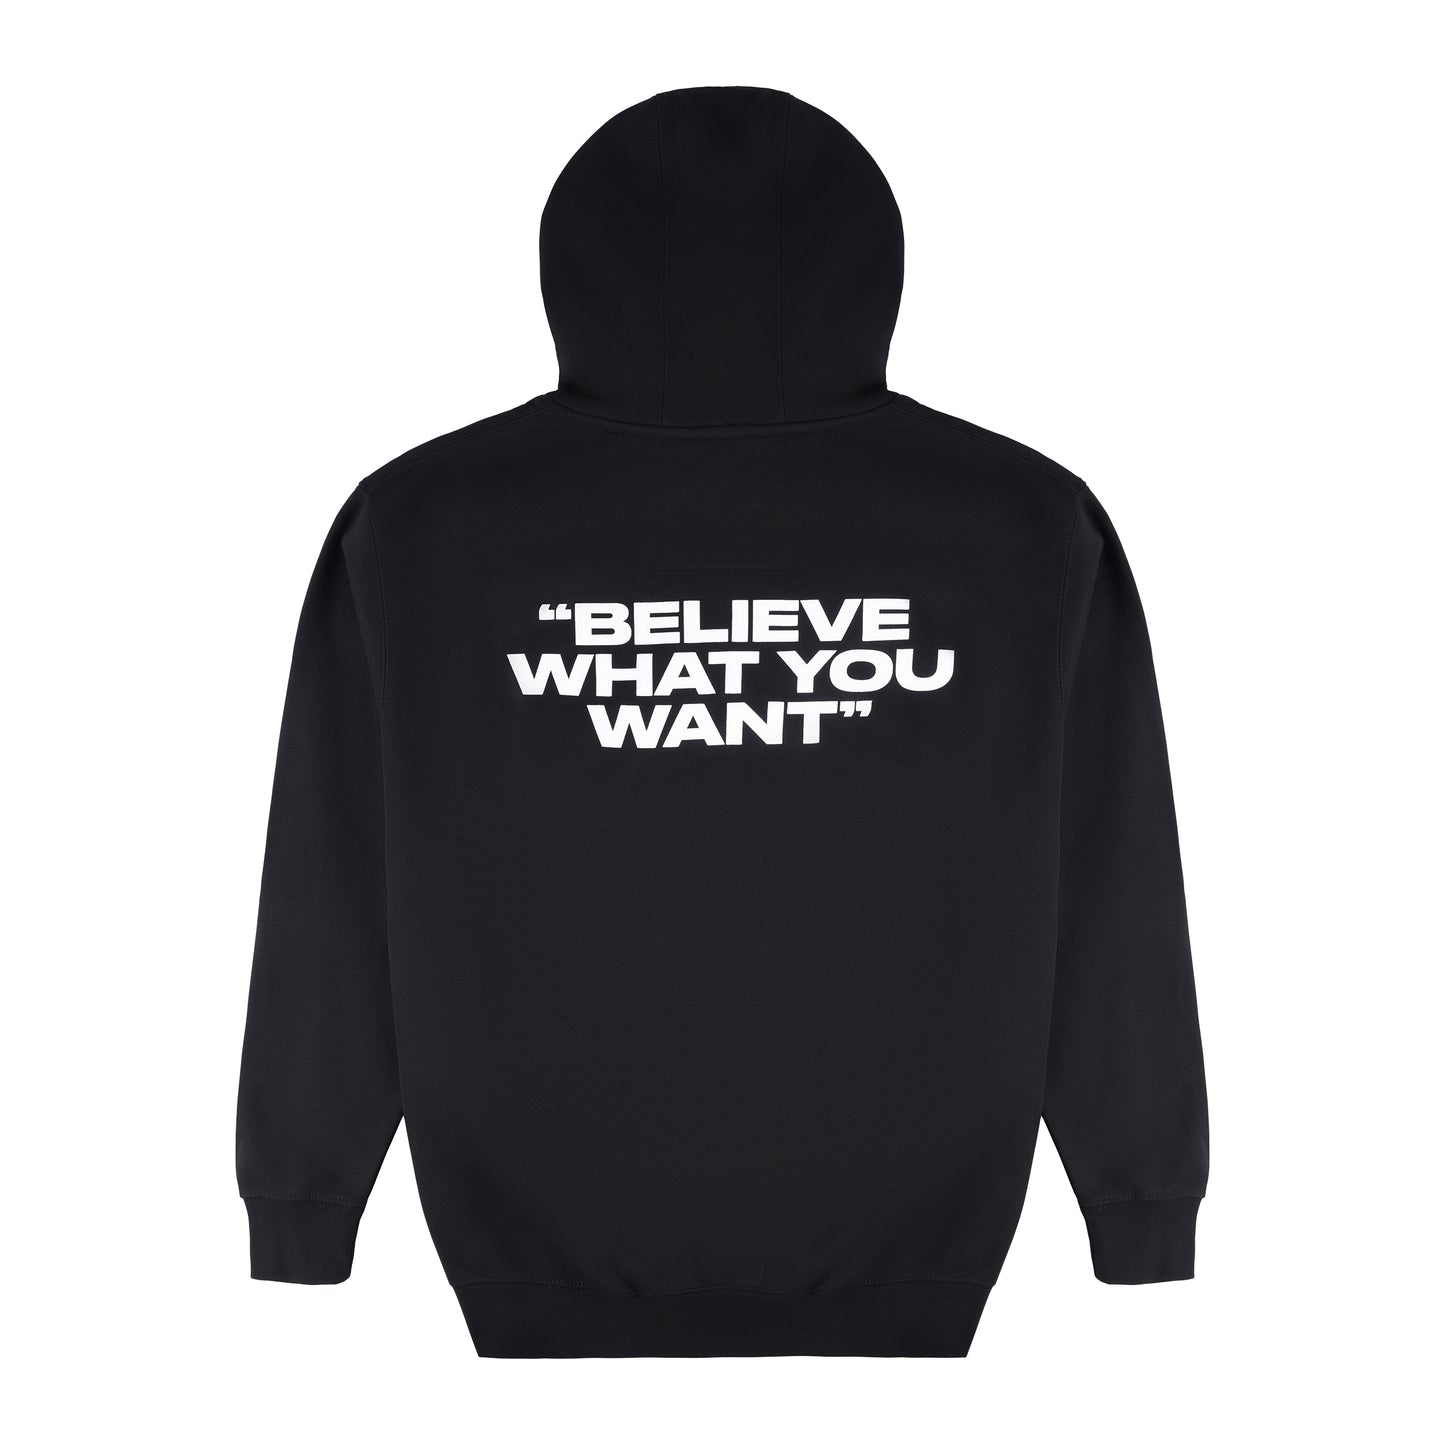 SNAX BELIEVE WHAT YOU WANT HOODIE